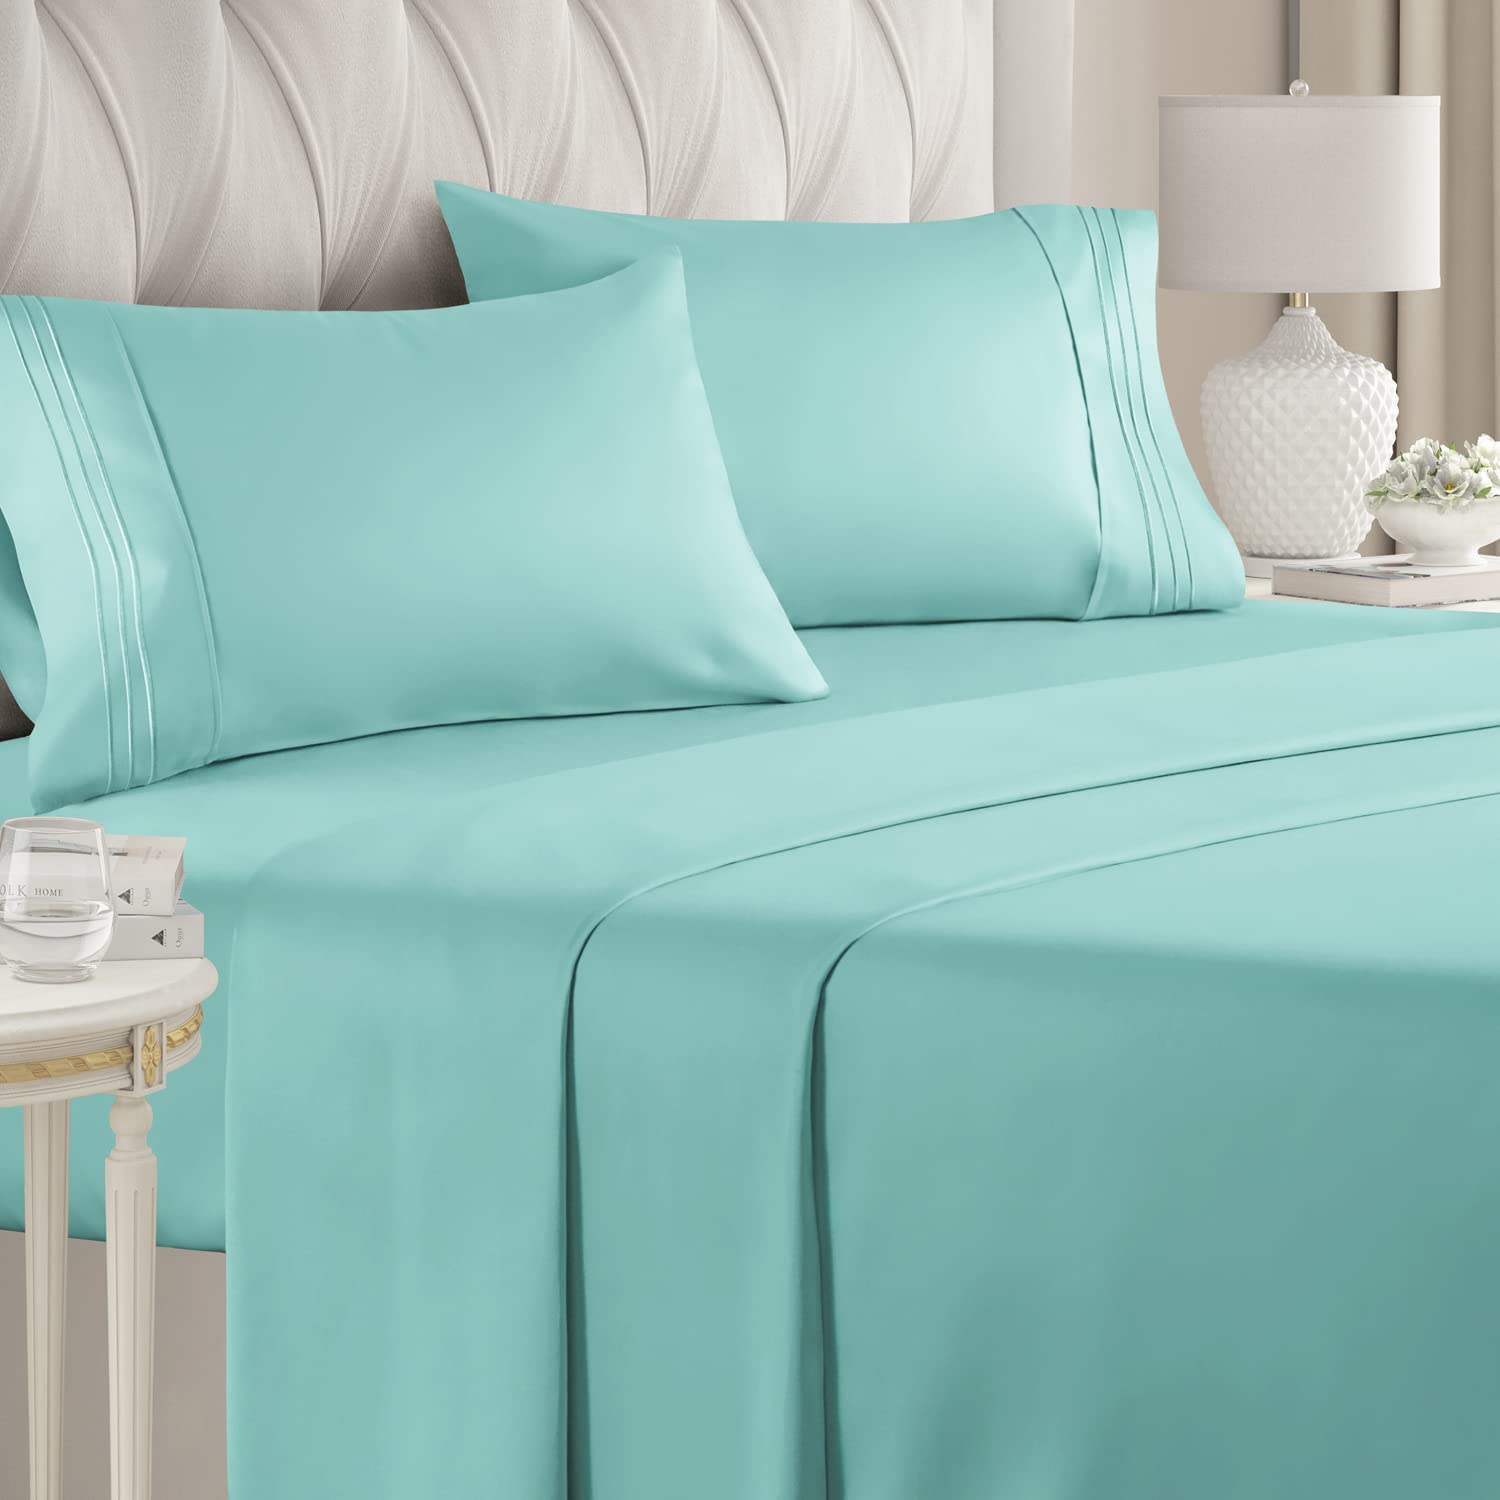 Buy Calking Size Flat Sheet Aqua Blue Egyptian Cotton 1000 Thread Count at- Egyptianhomelinens.com